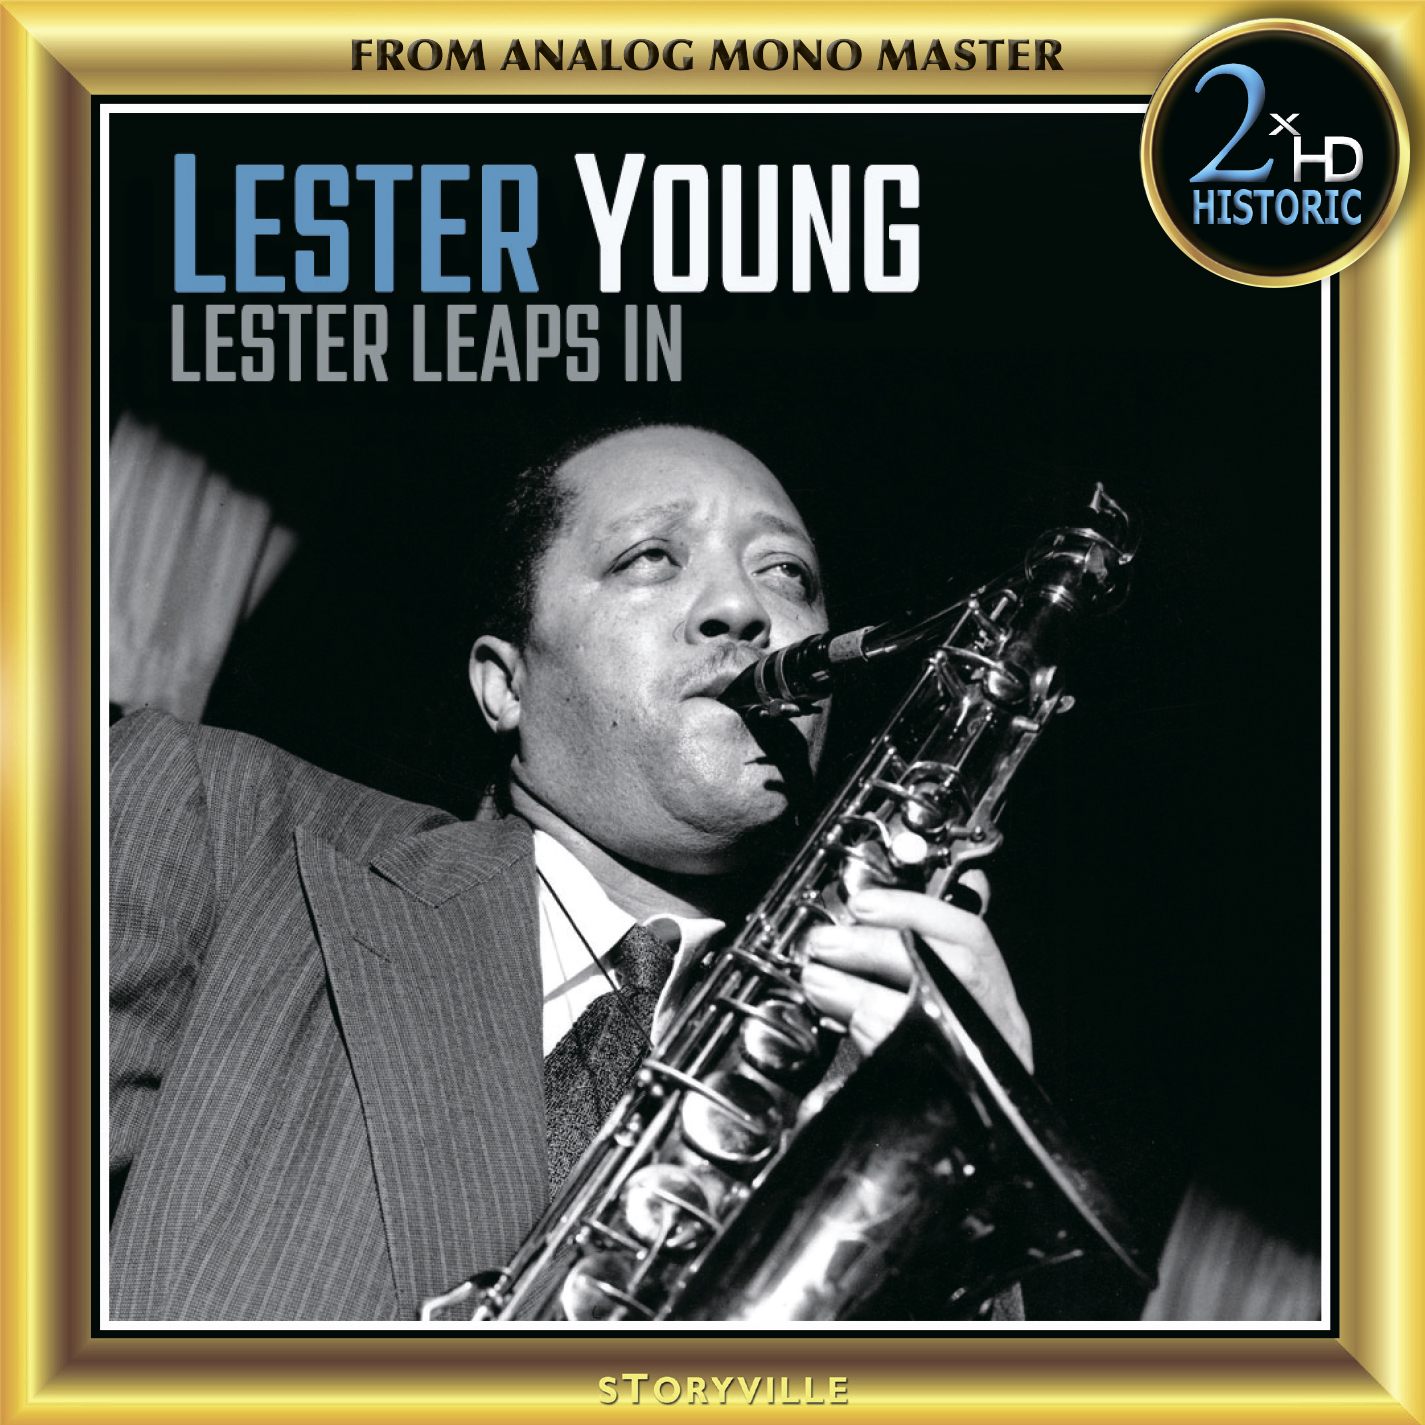 Lester Young - Lester Leaps In (2018) [HDTracks DSF DSD64/2.82MHz + FLAC 24bit/96kHz]